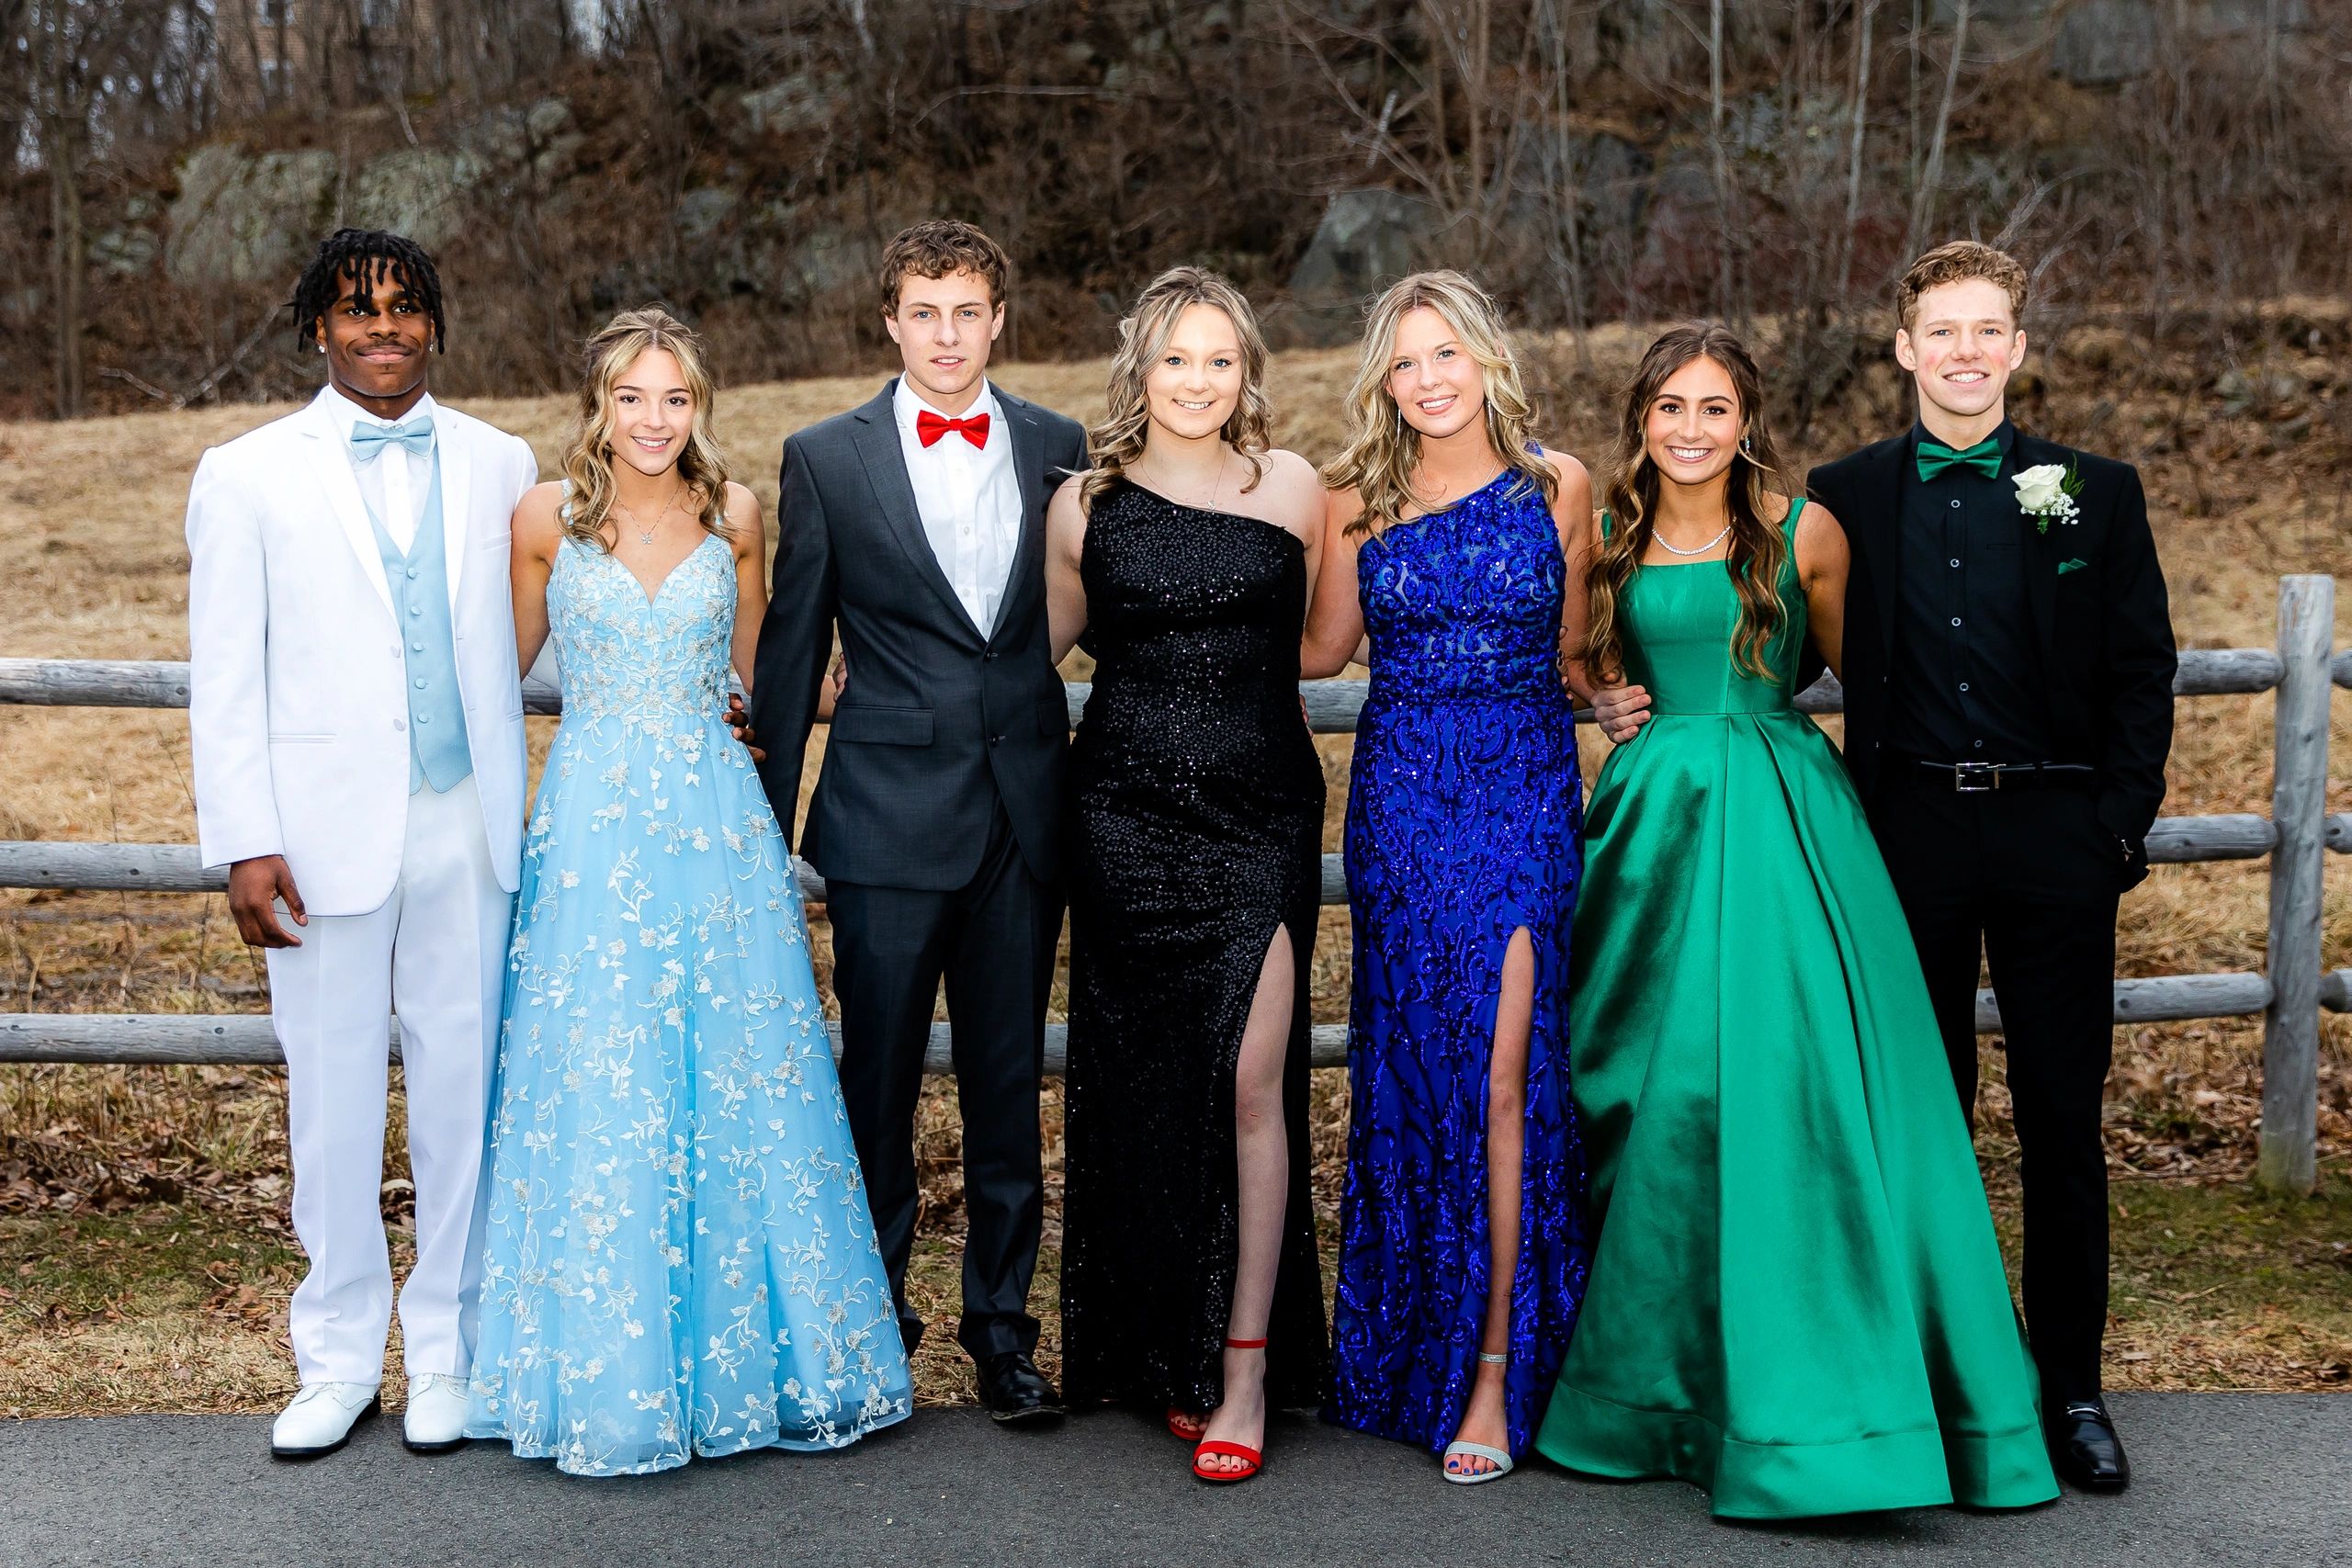 6 Tips for Perfect Prom Photos